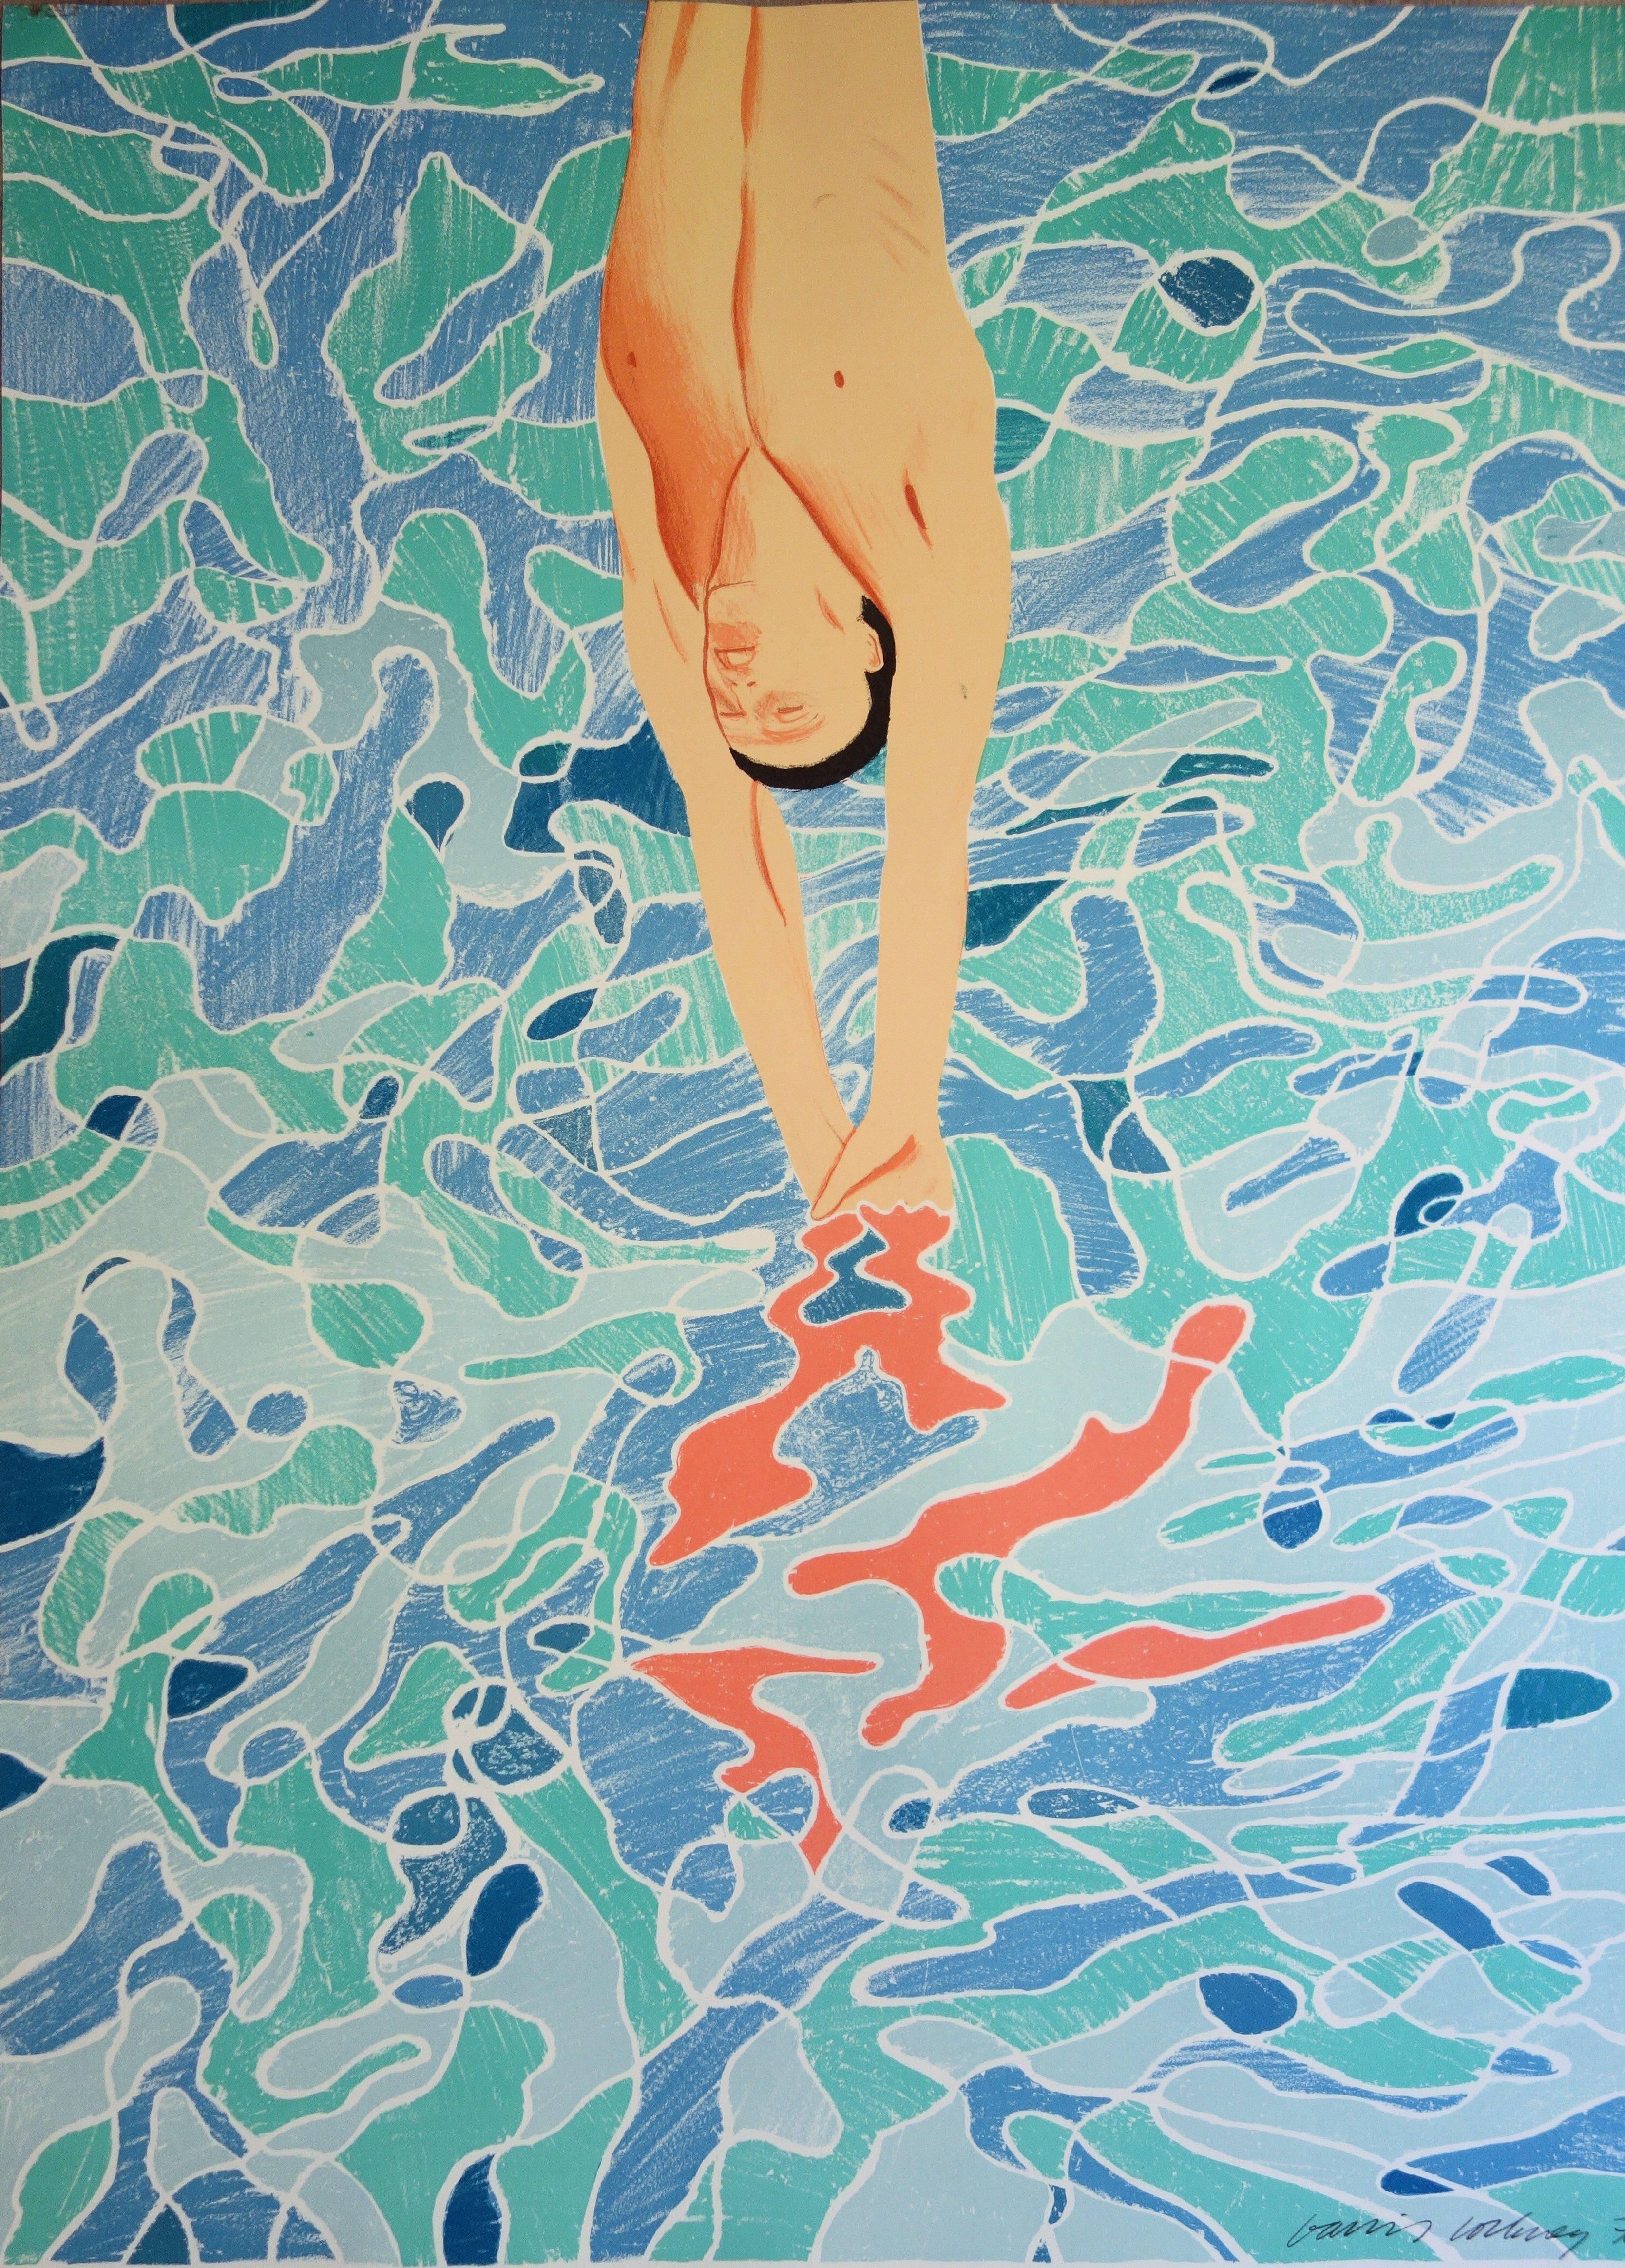 Pool Diver - Lithograph (Olympic Games Munich 1972) - Print by David Hockney